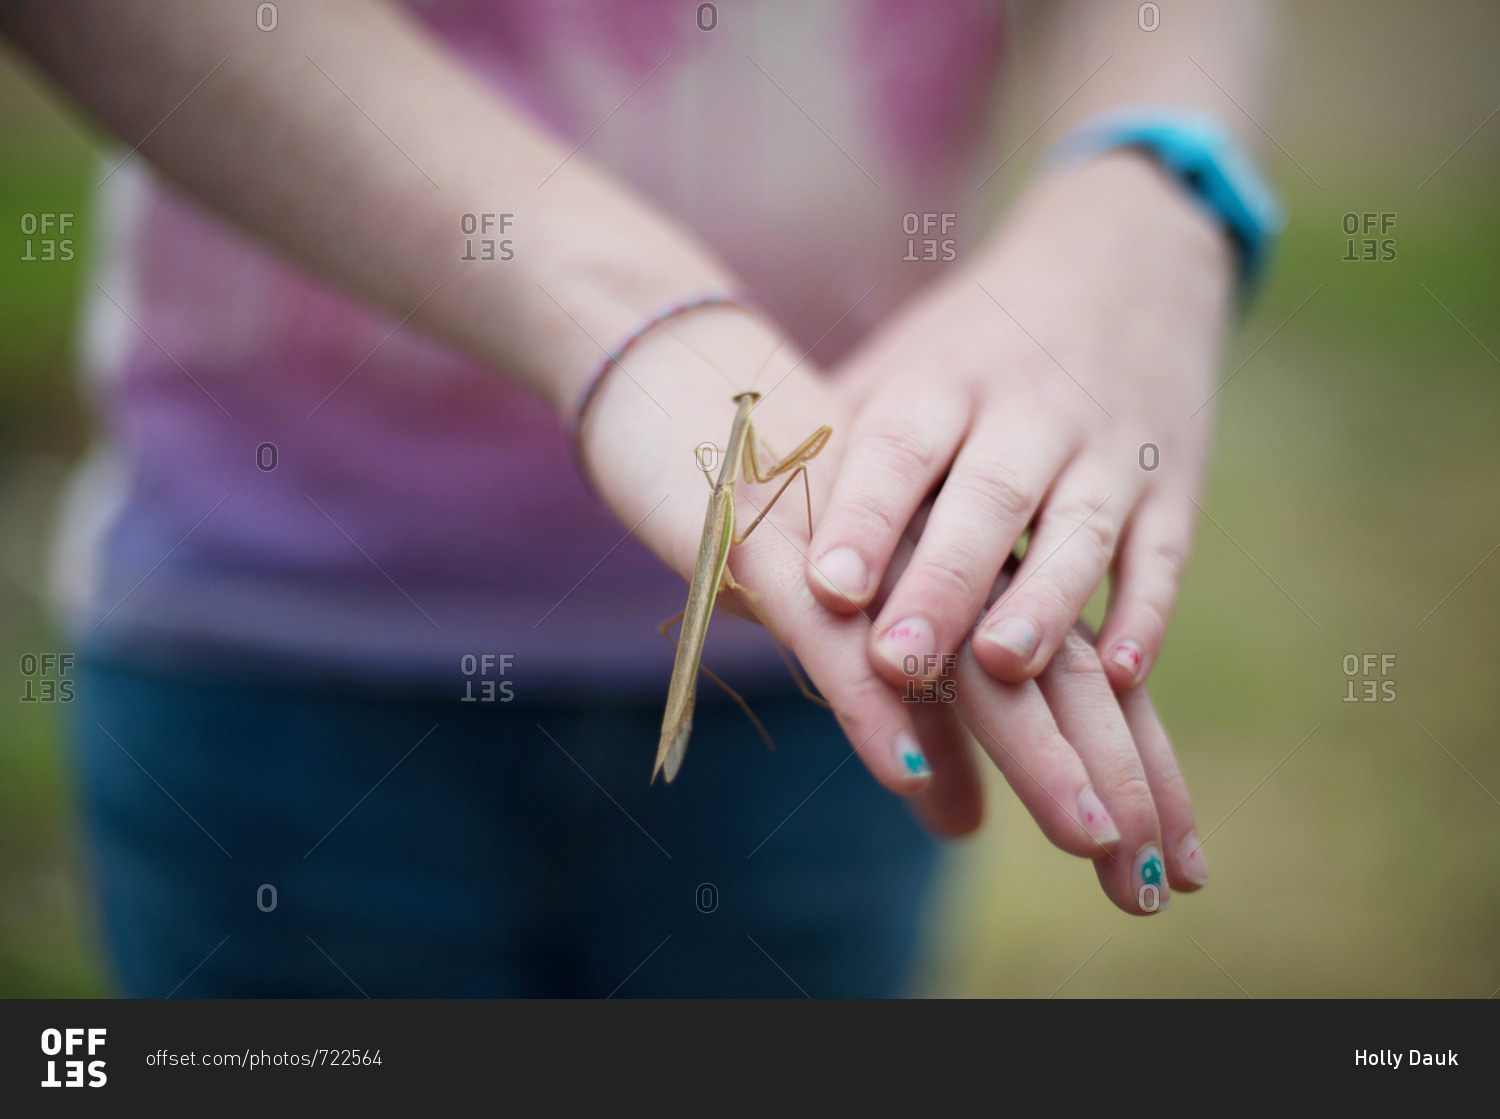 Girl holding stick insect on her hand